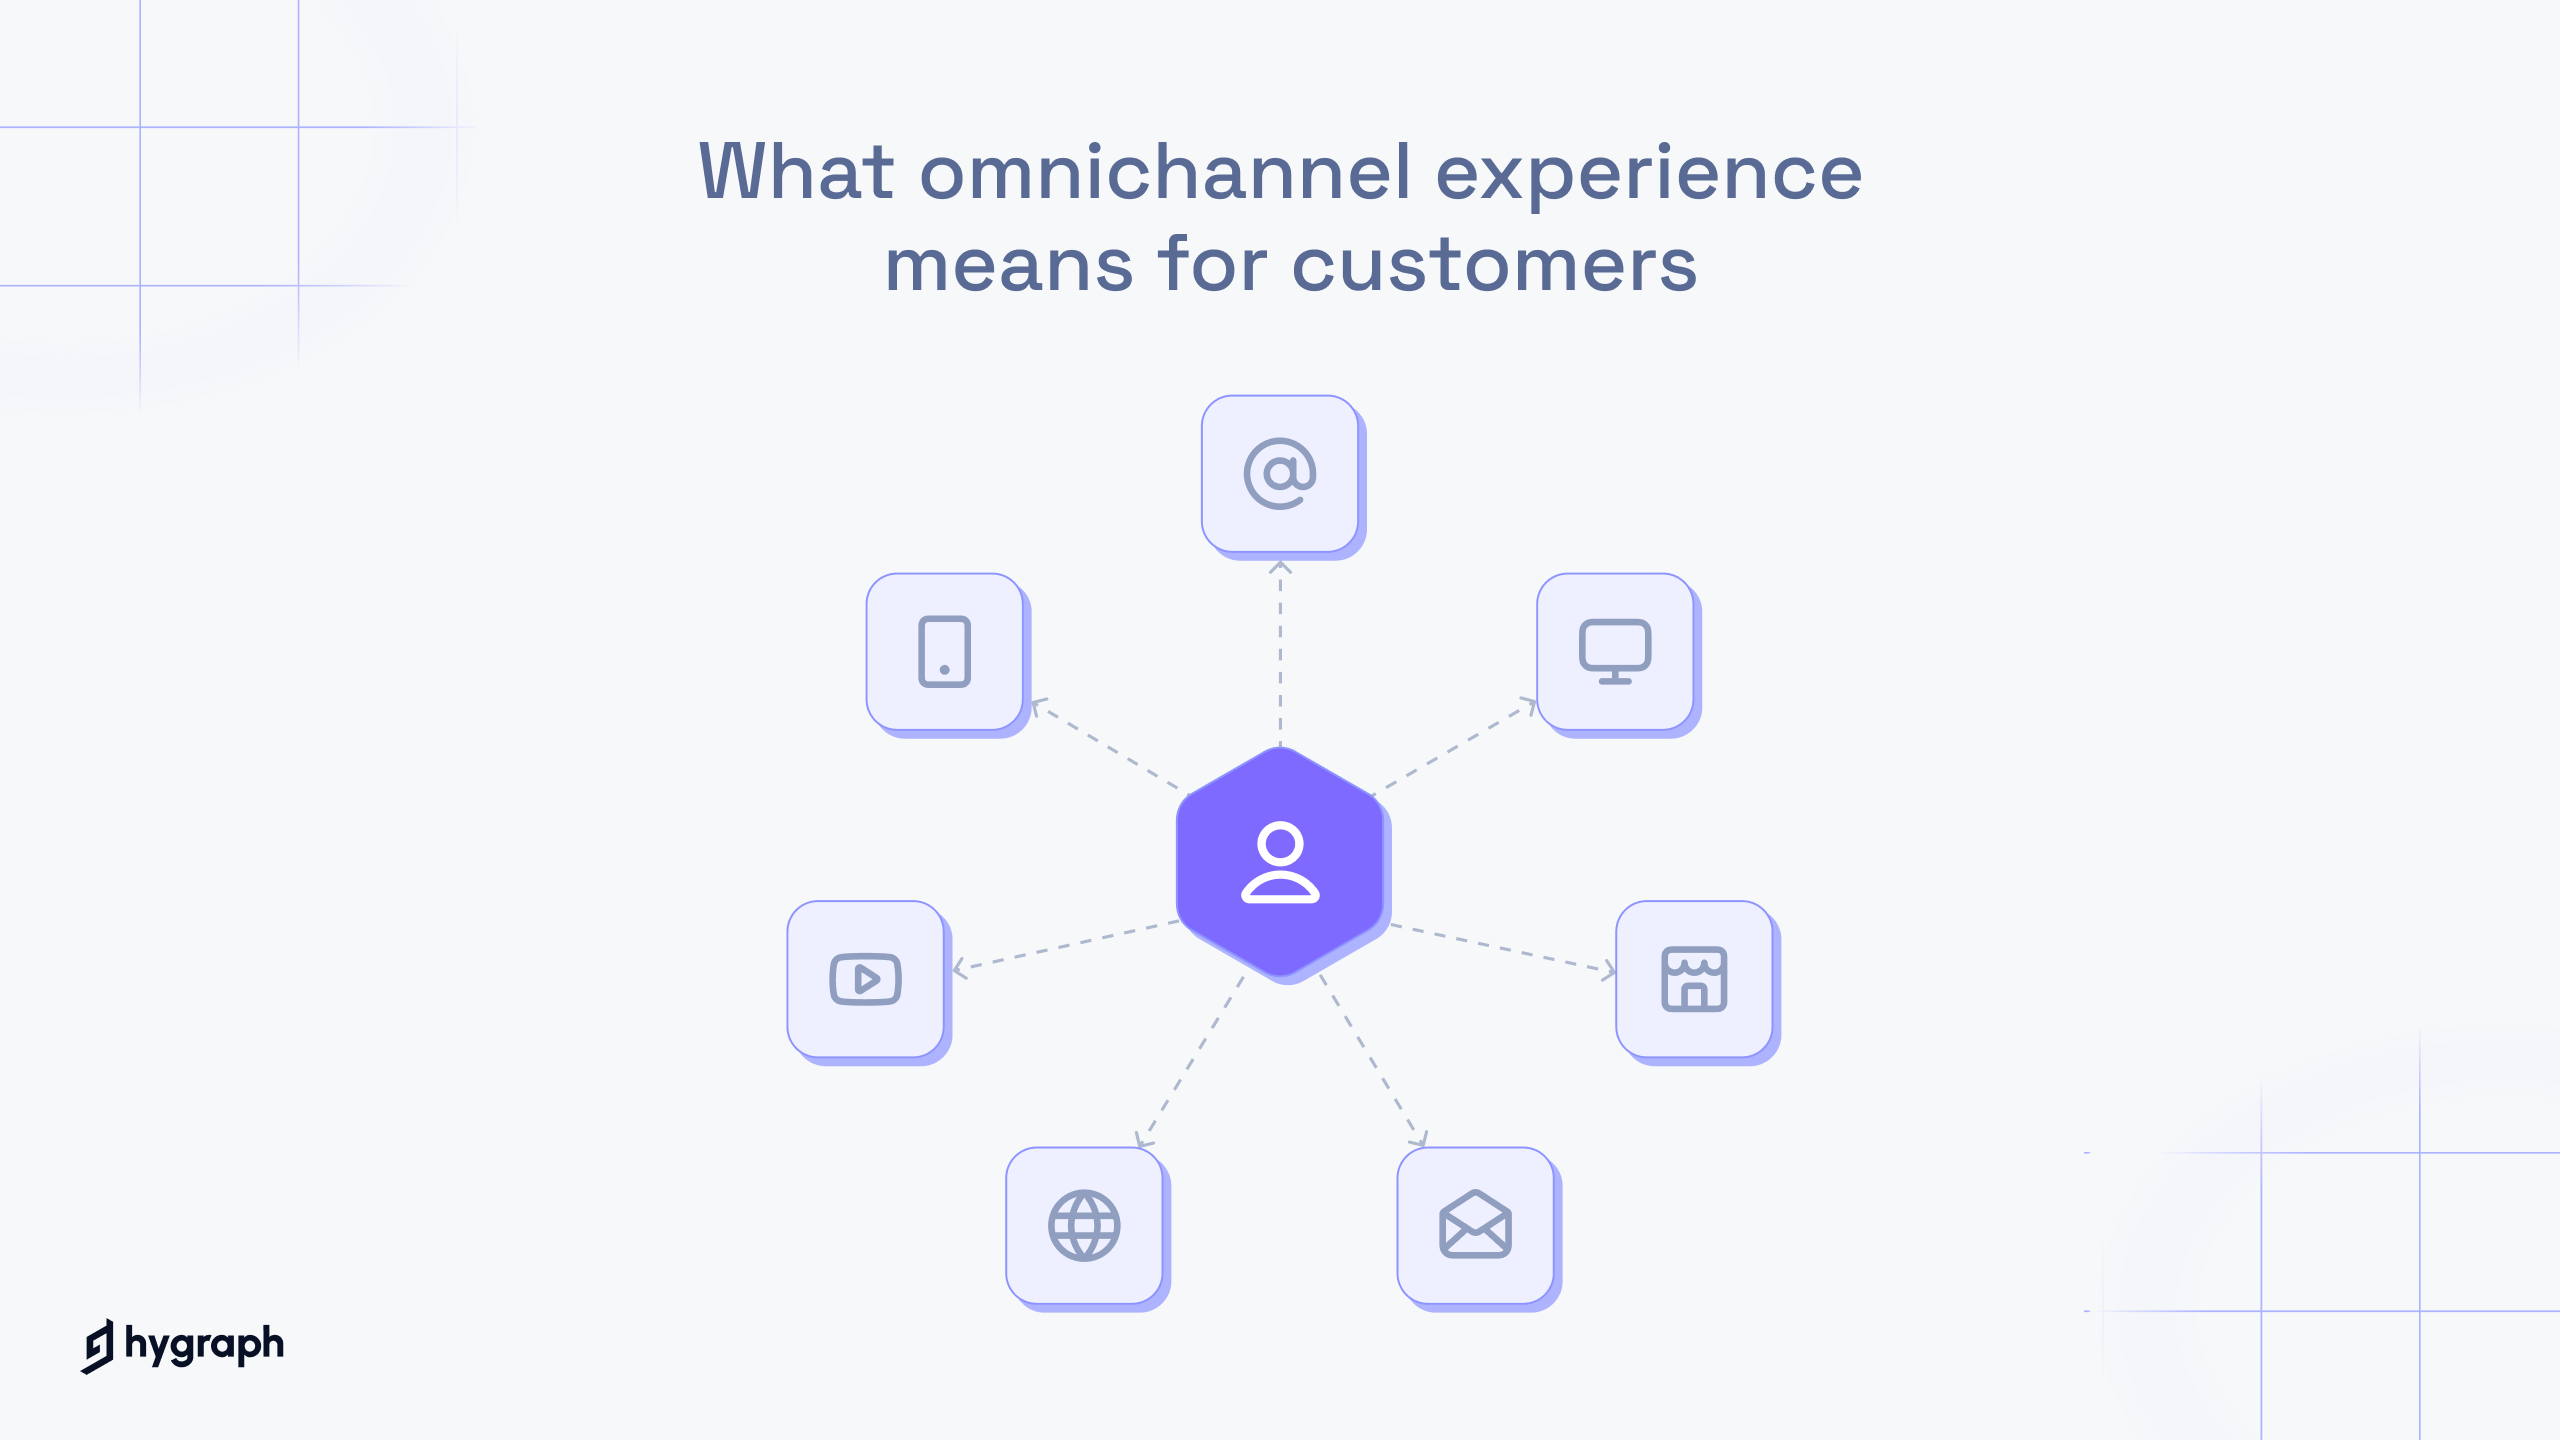 What omnichannel experience means for customers